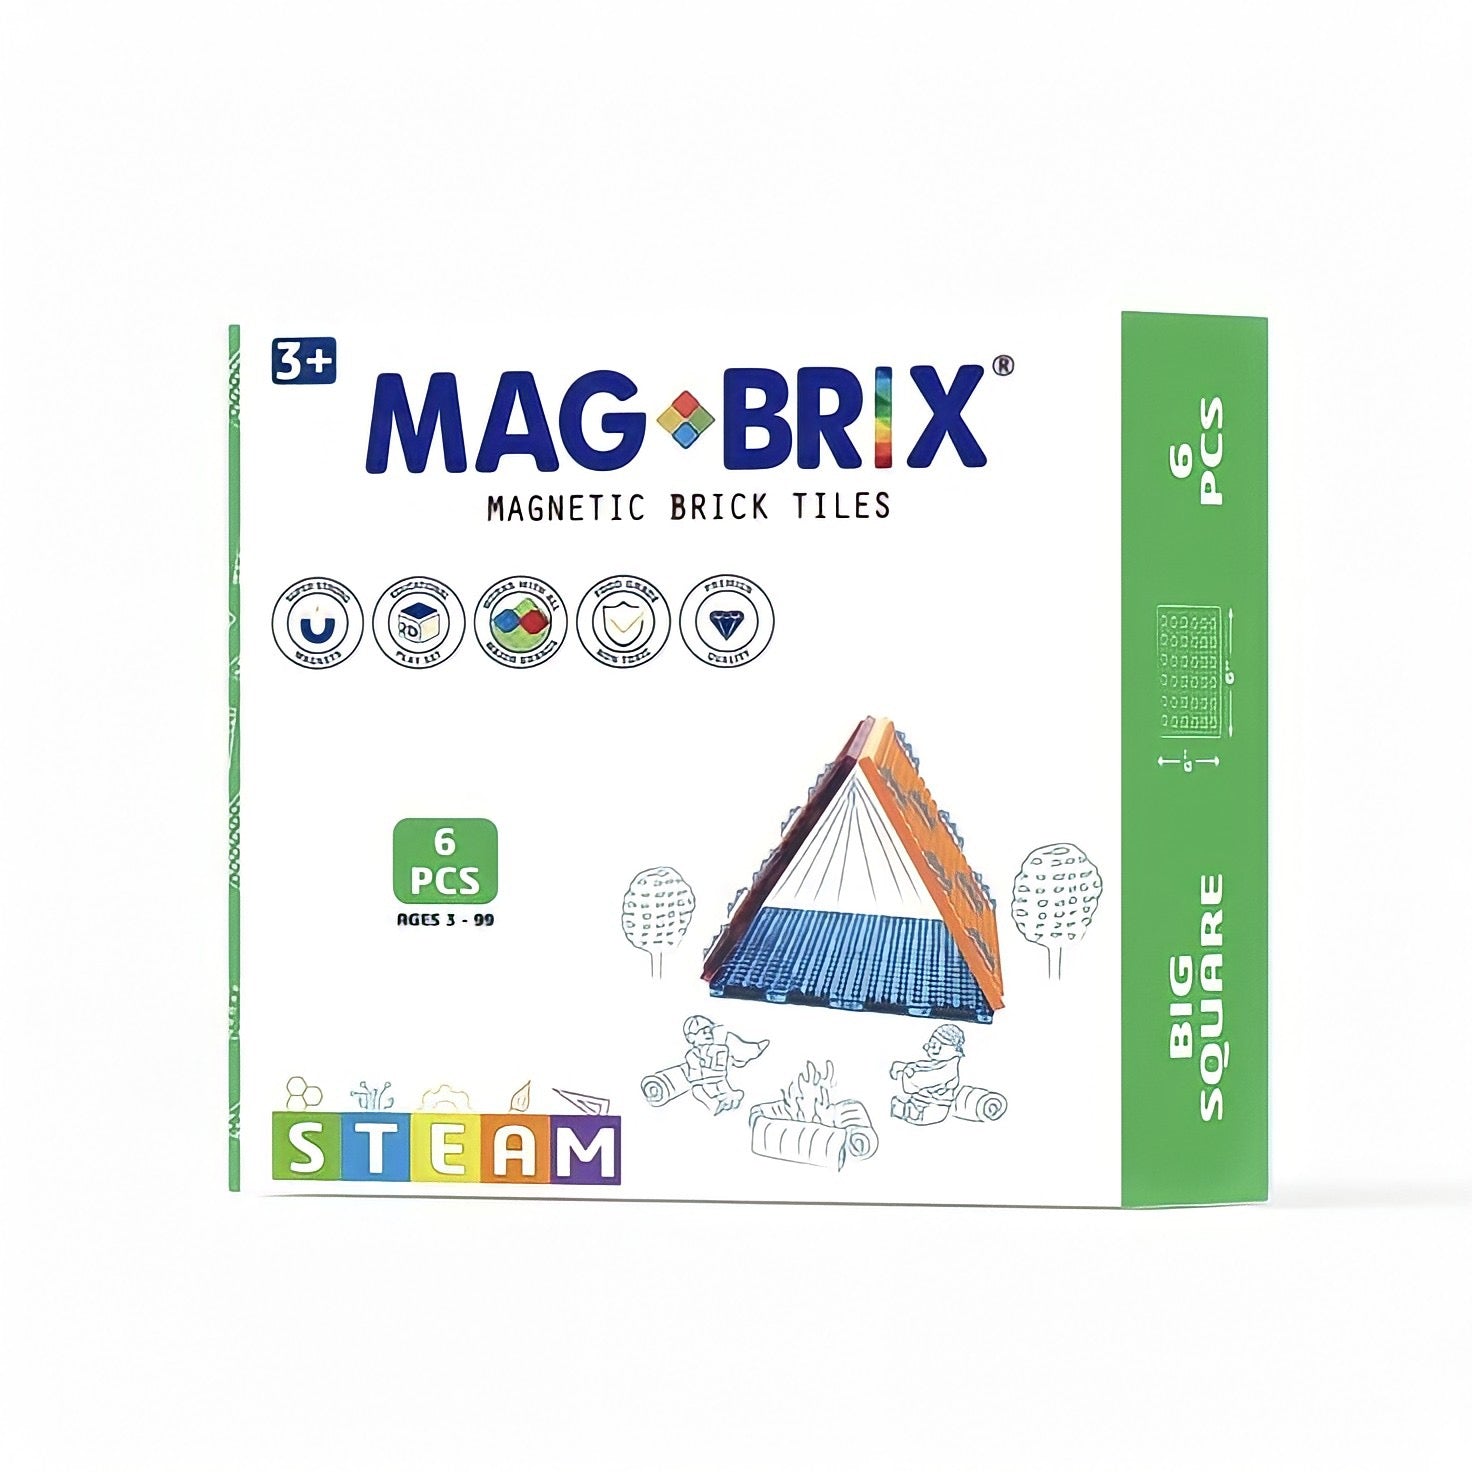 MAGBRIX® Magnetic Brick Tiles | 6 Piece Big Square Set - Compatible with Lego®